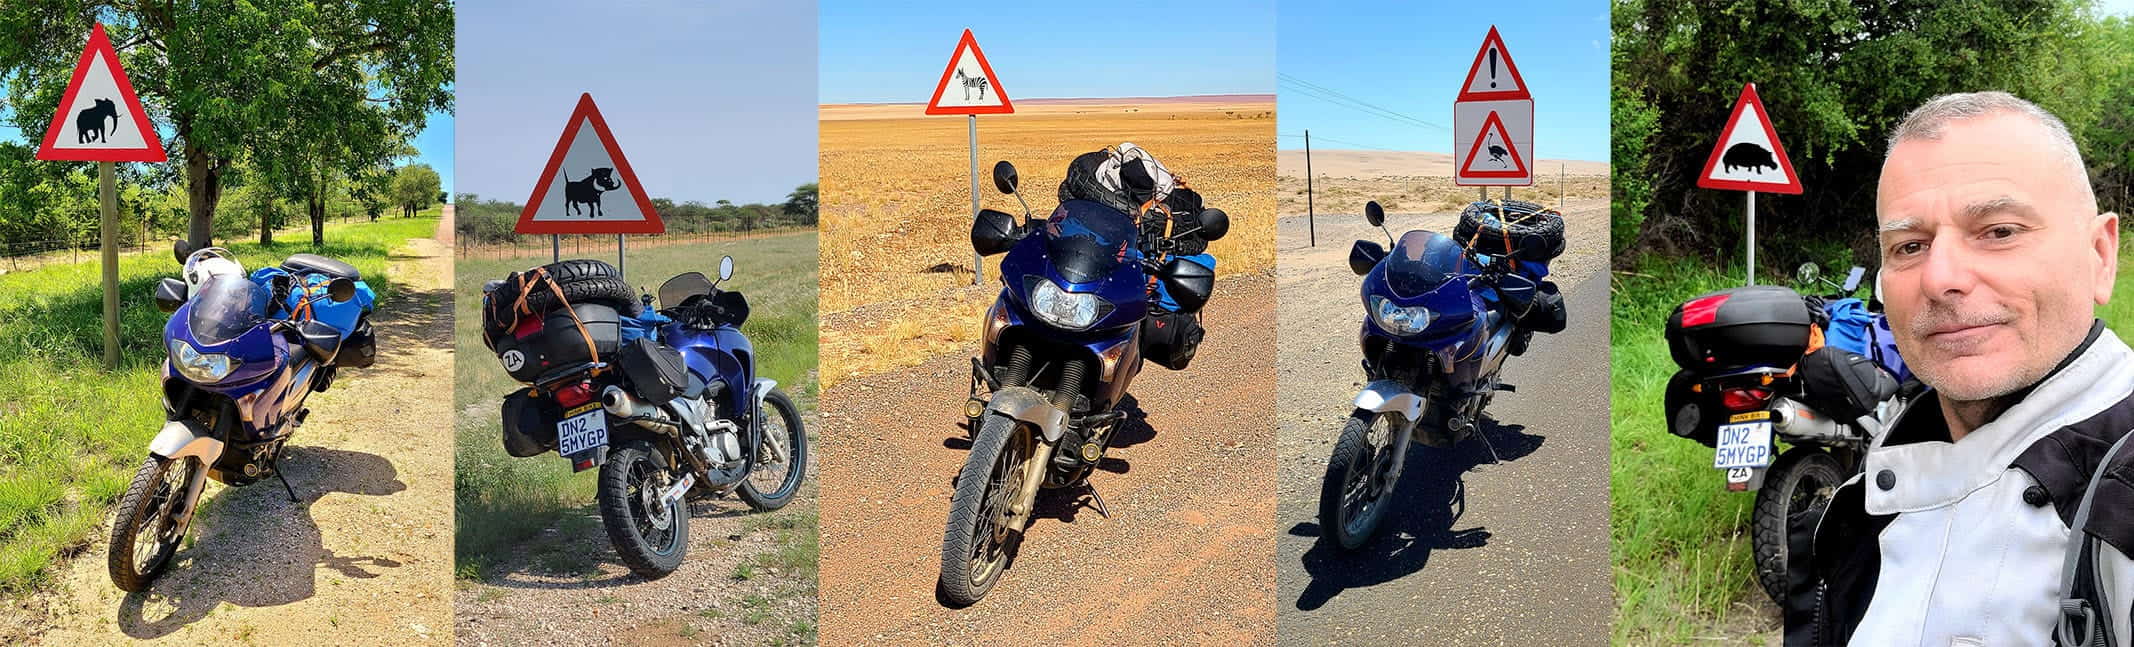 collage of photos of a motorcycle next to various wild animal warning signs